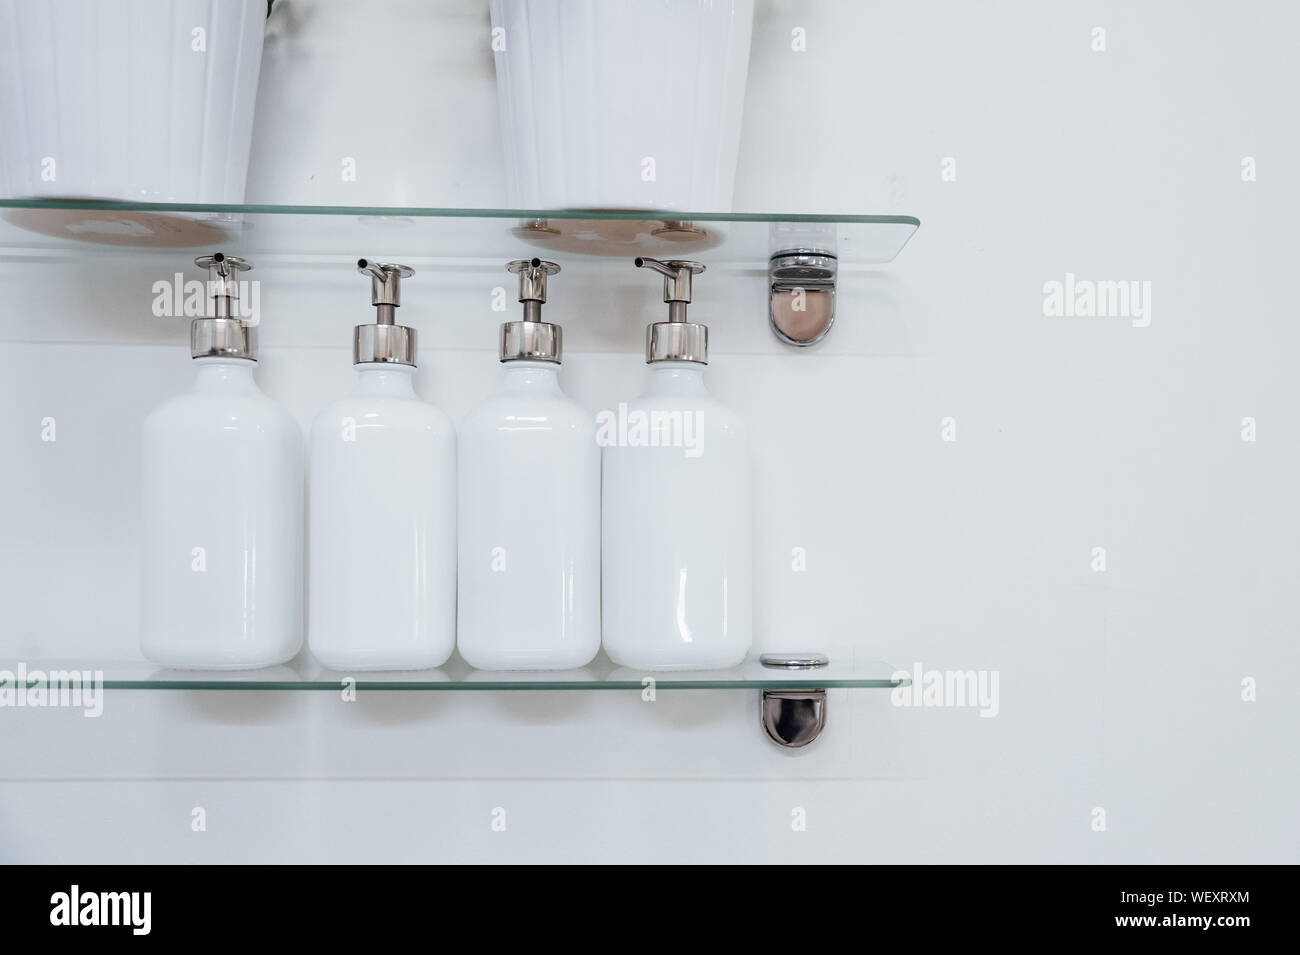 Close-up Of Soap Dispensers On Shelves Stock Photo